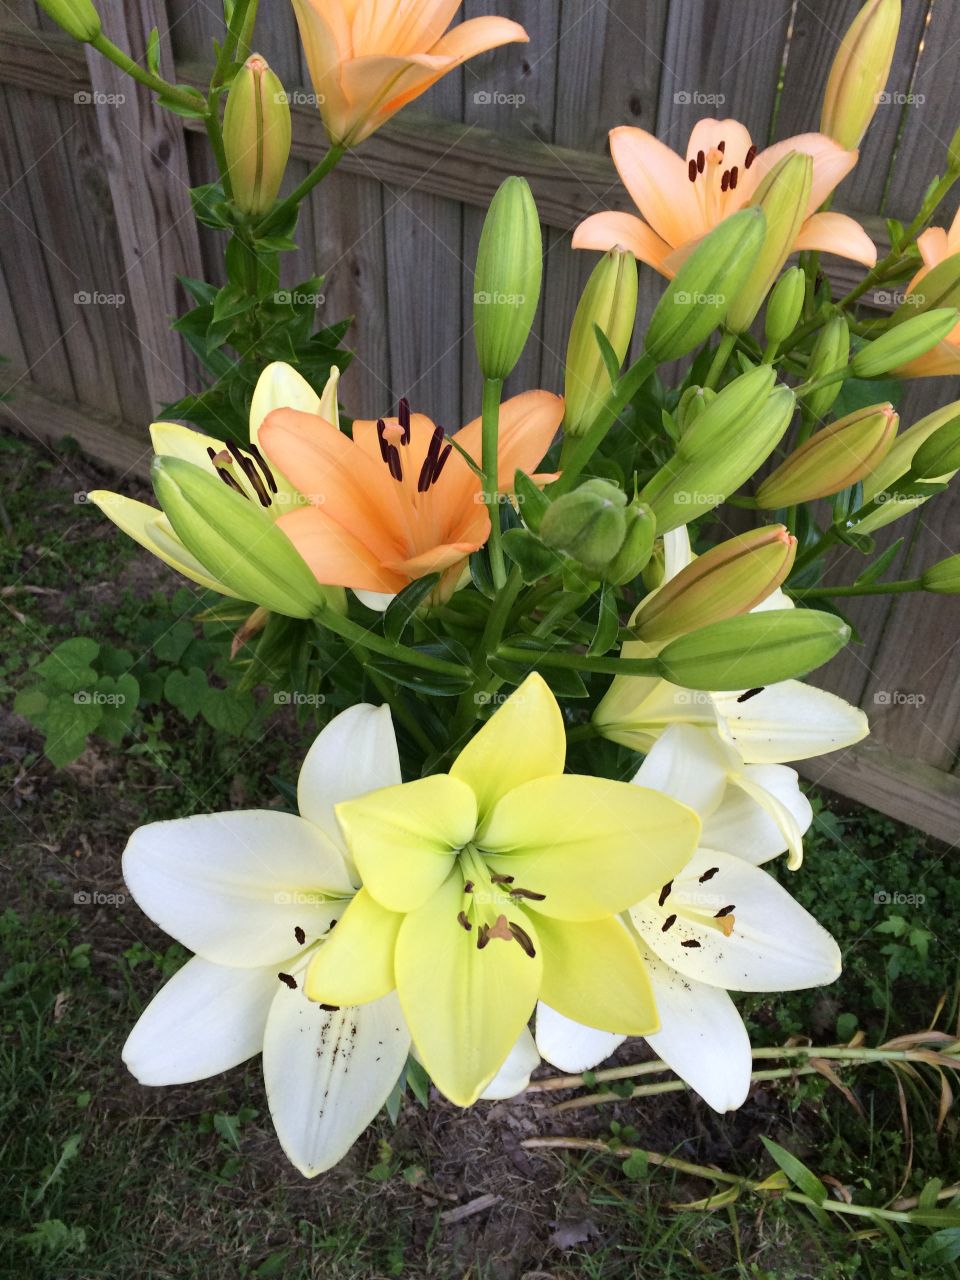 Lily's 